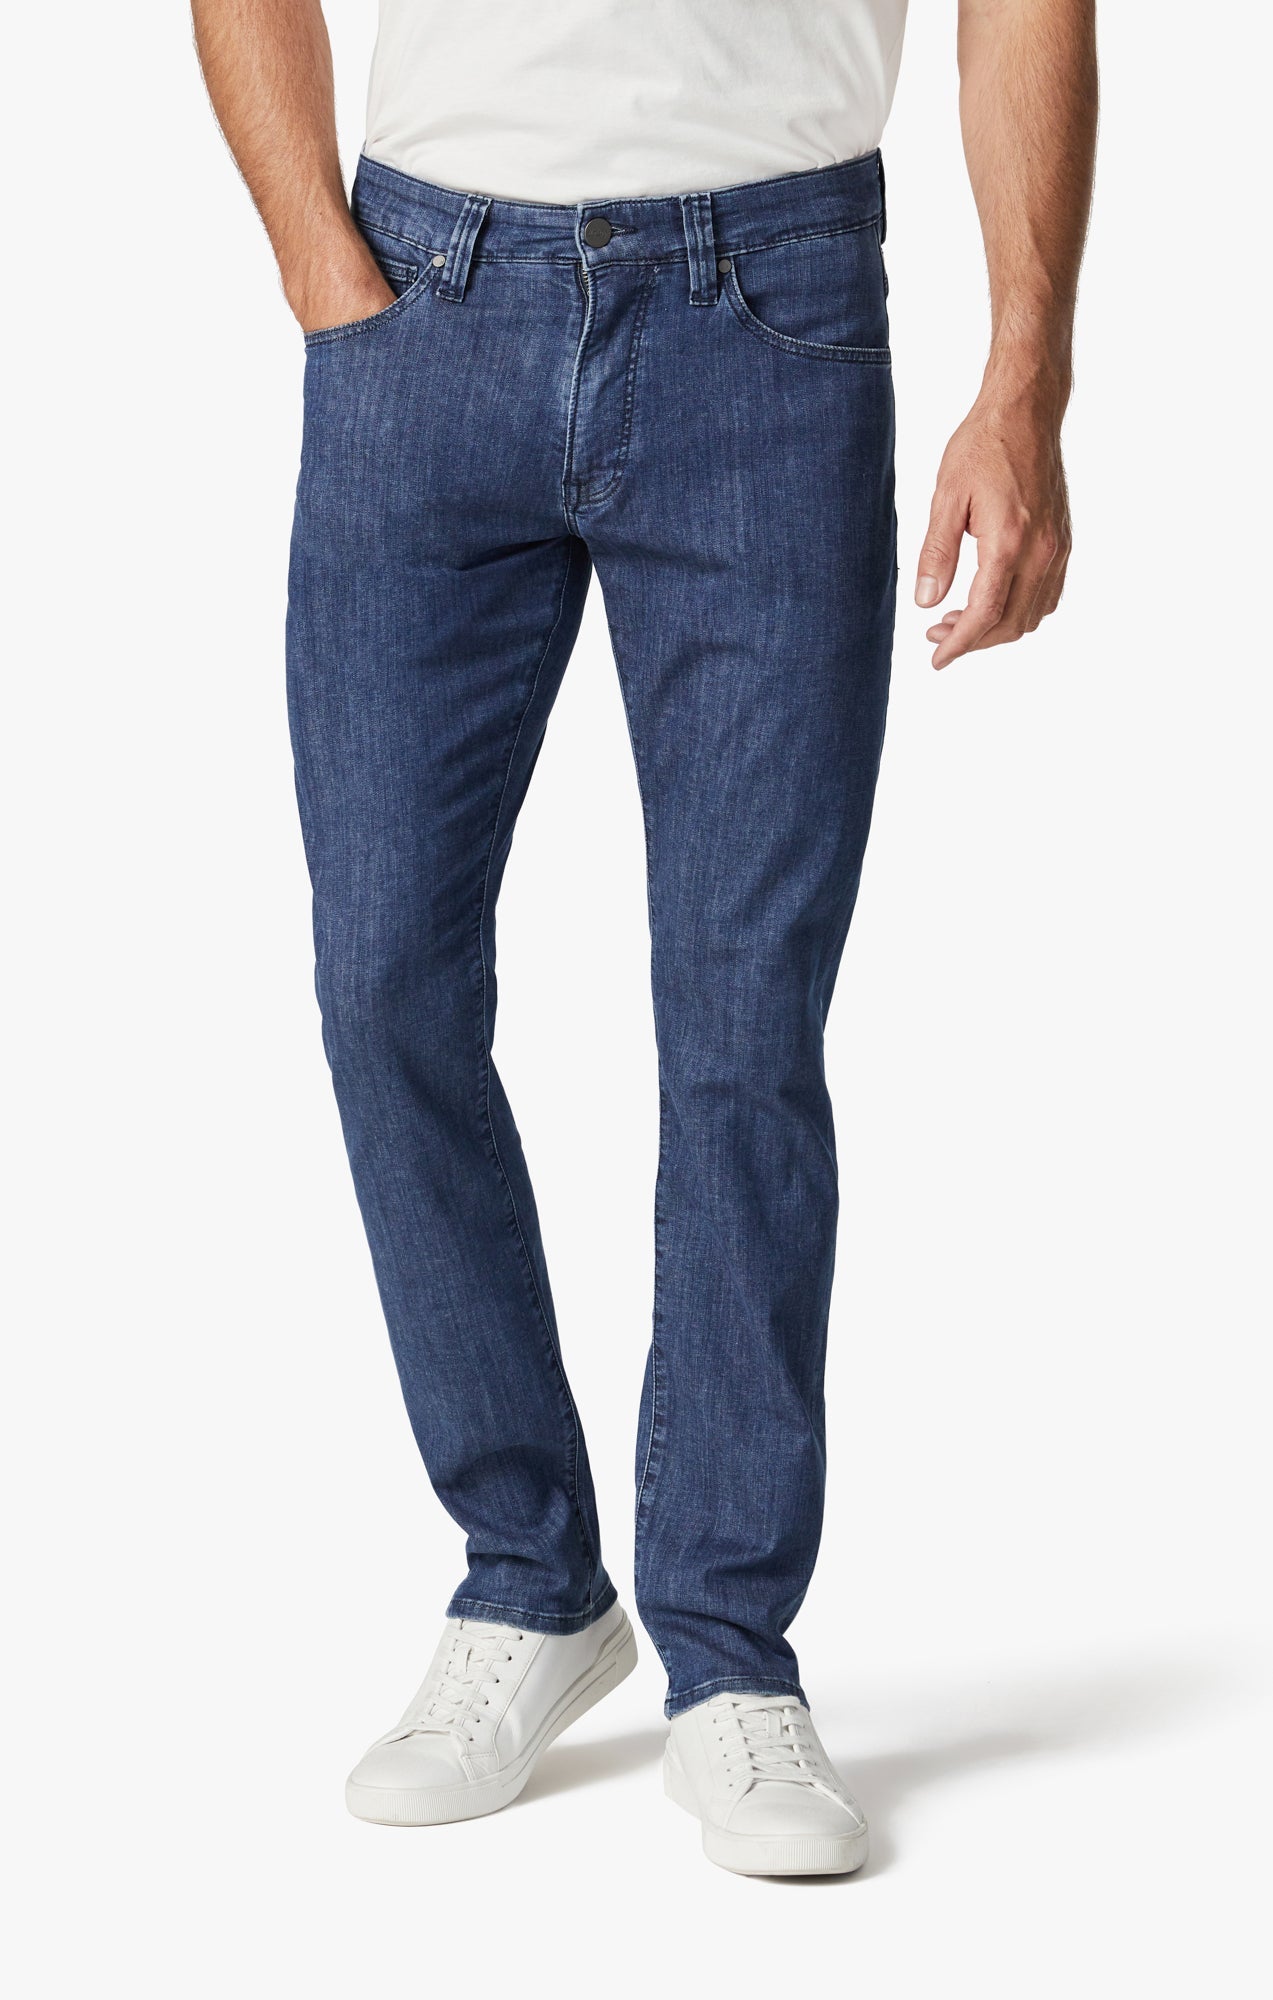 Courage Straight Leg Jeans In Mid Kona Image 2